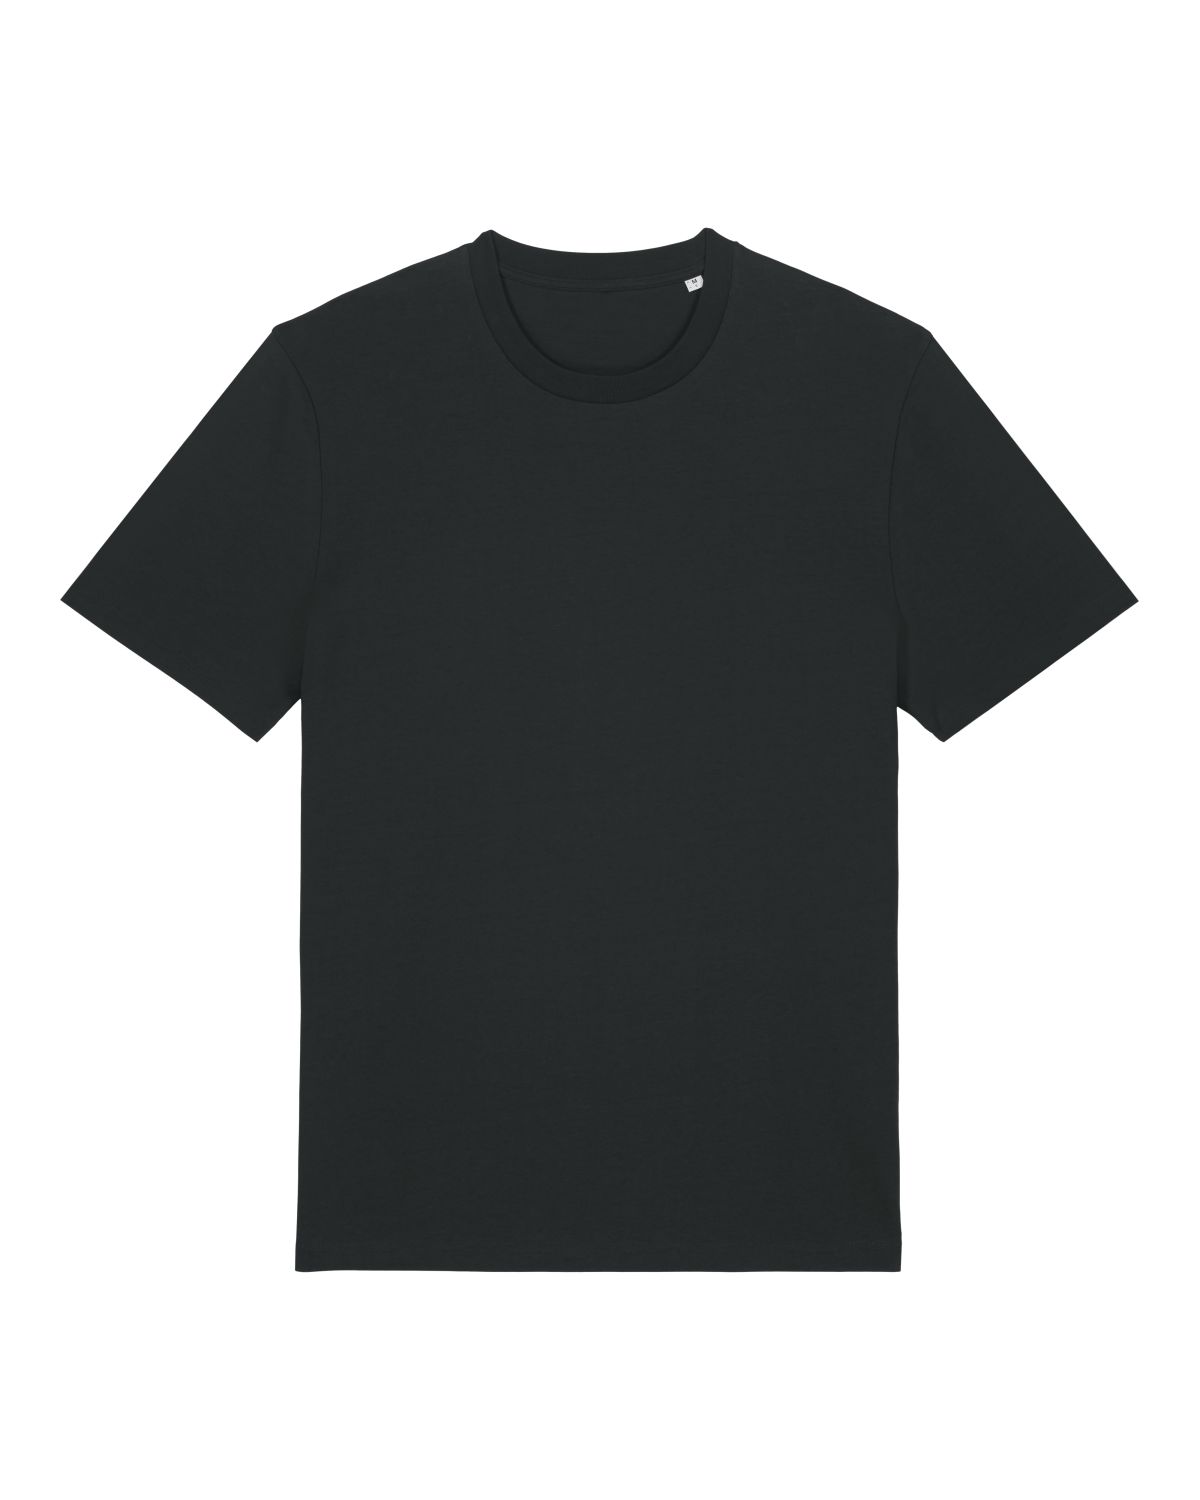 Customize your own sustainable t-shirt made of 100% GOTS-certified organic cotton